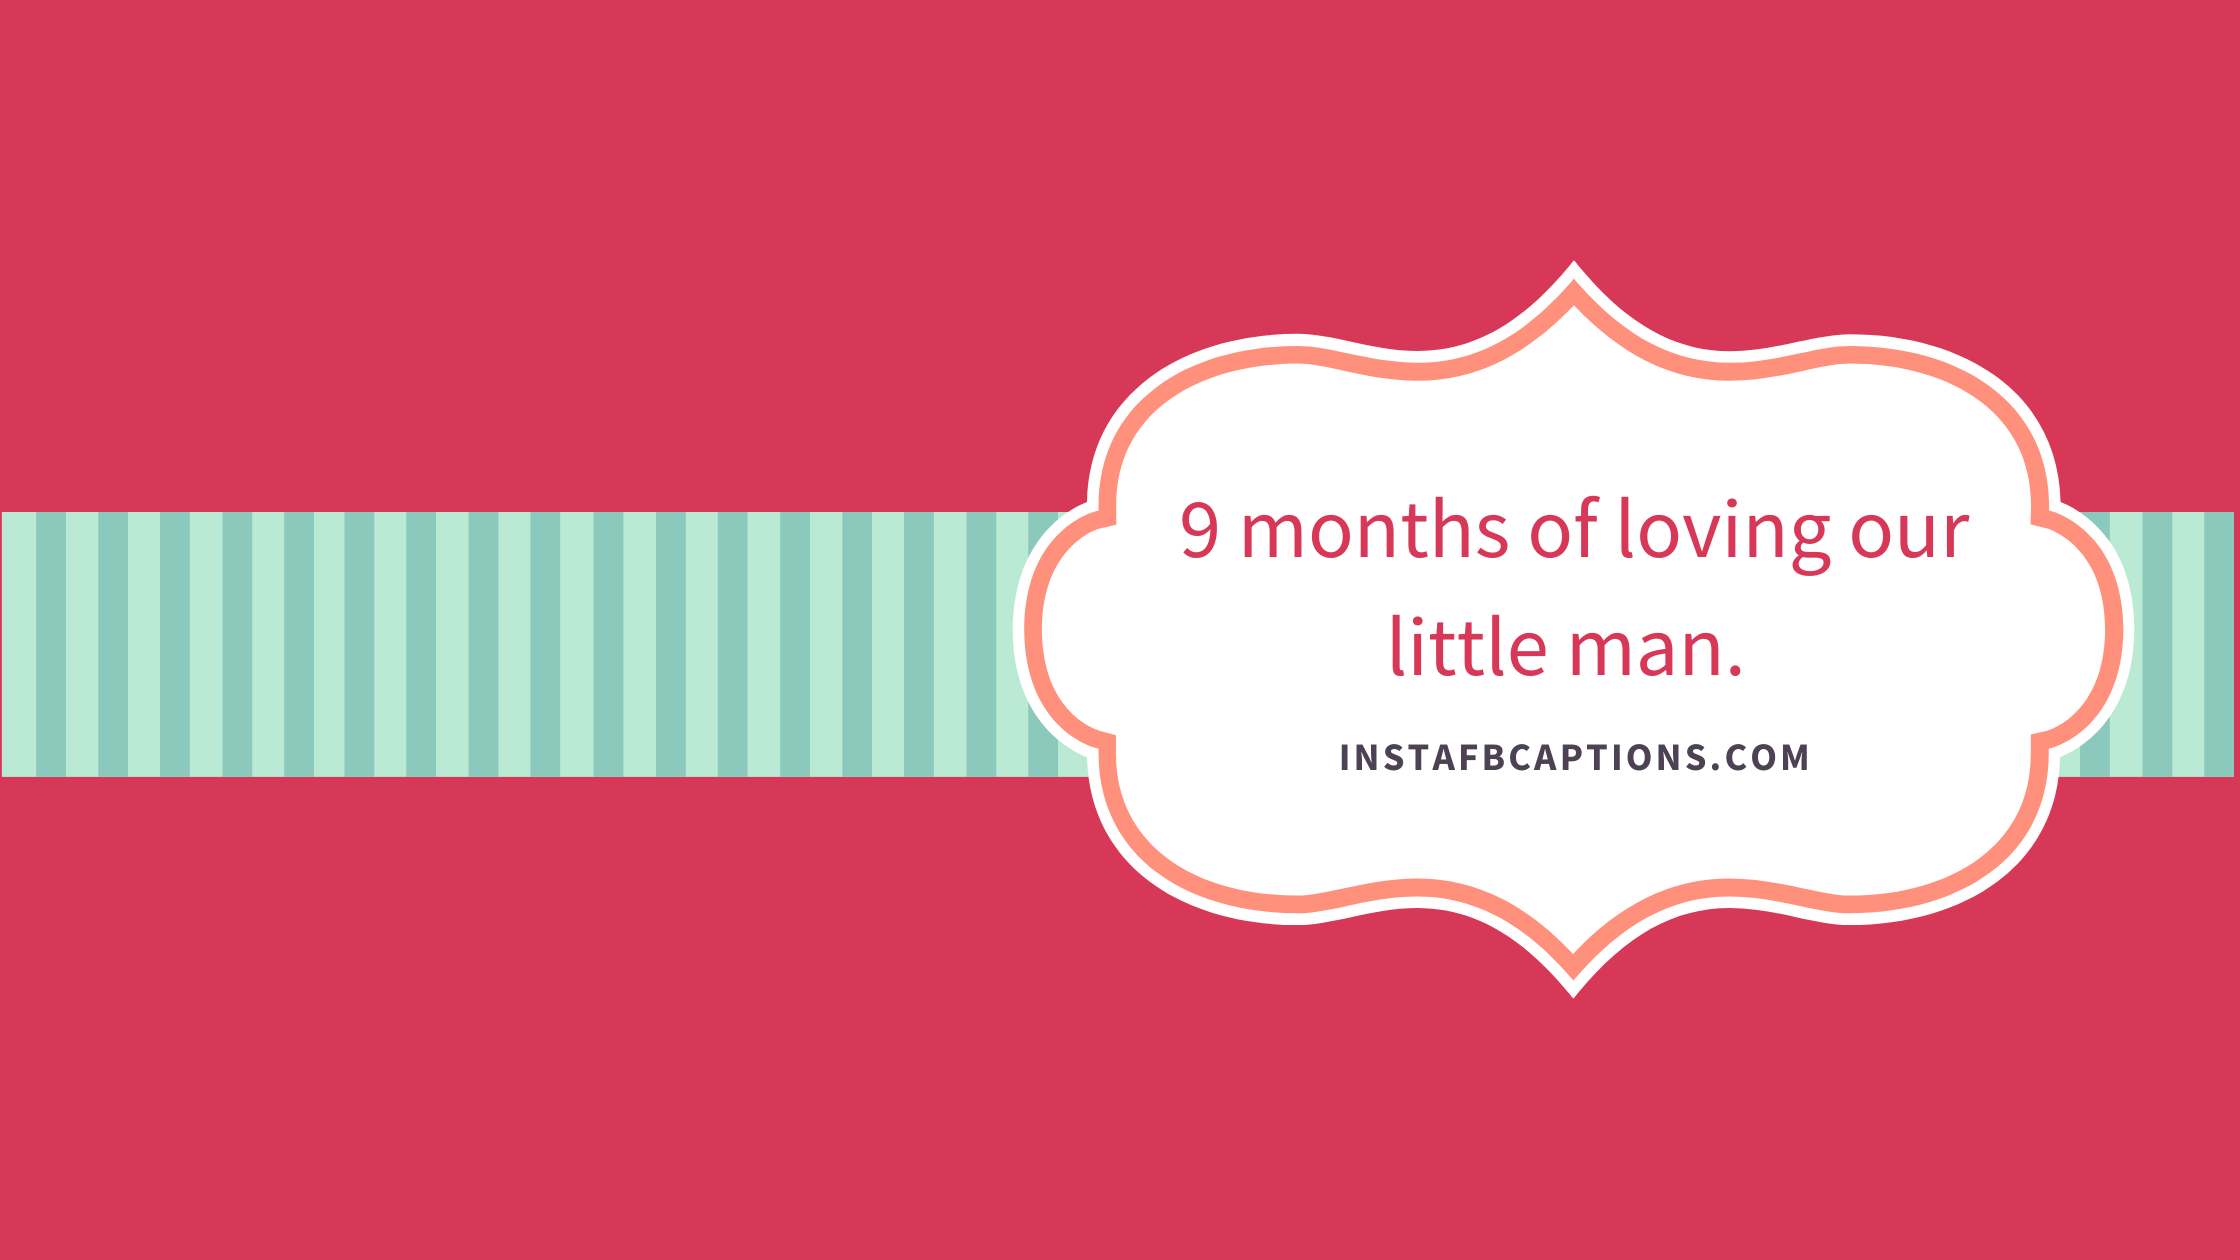 Lovely Messages For 9 Month Old Baby Boy For Instagram  - Lovely Messages for 9 Month Old Baby Boy for Instagram  - 9 Month Baby Instagram Post Captions in 2022